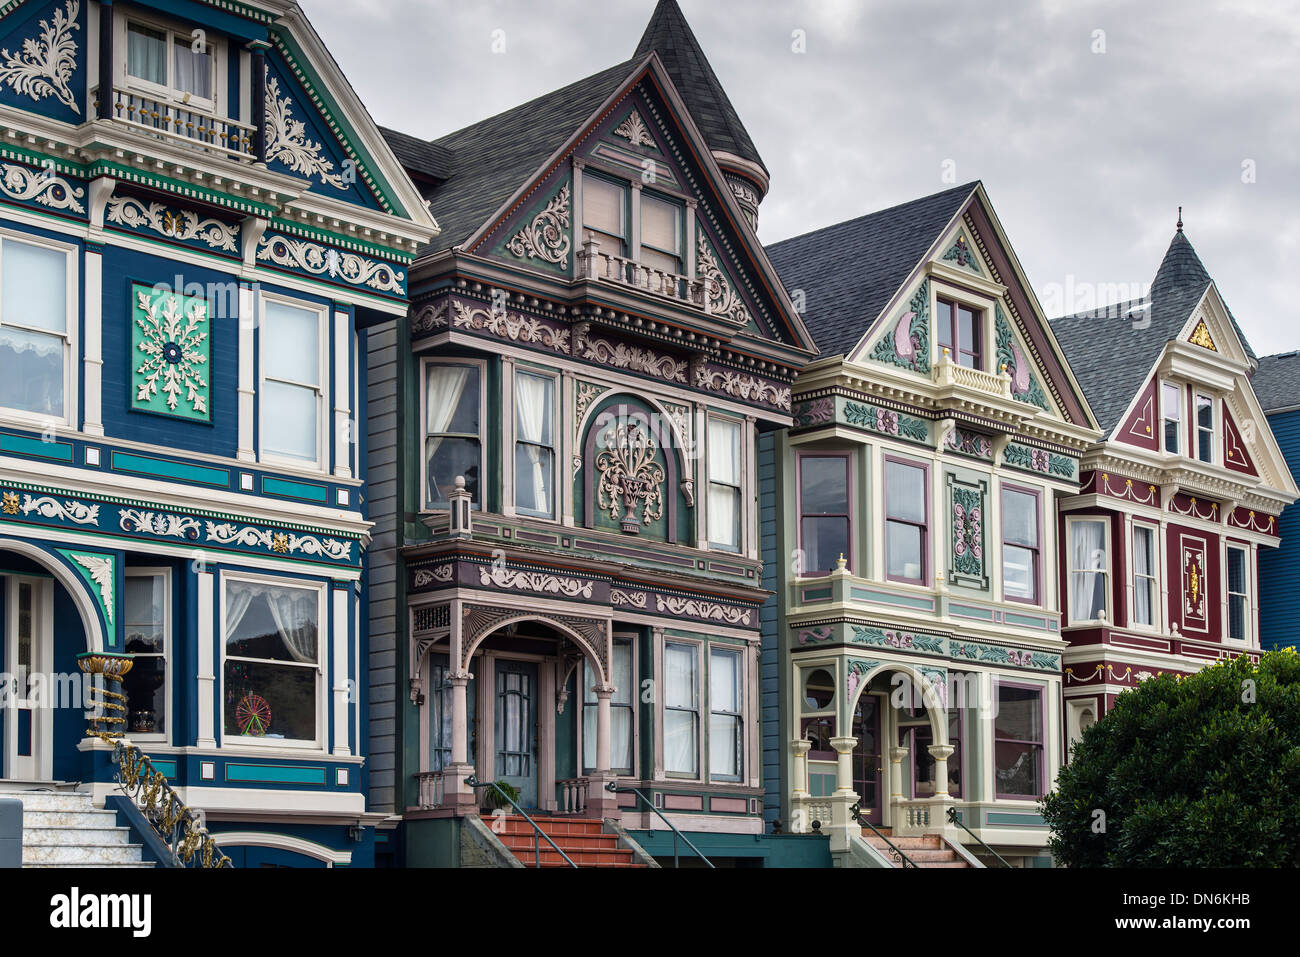 The Painted Ladies victorian houses, Haight-Ashbury district, San Francisco, California, USA Stock Photo